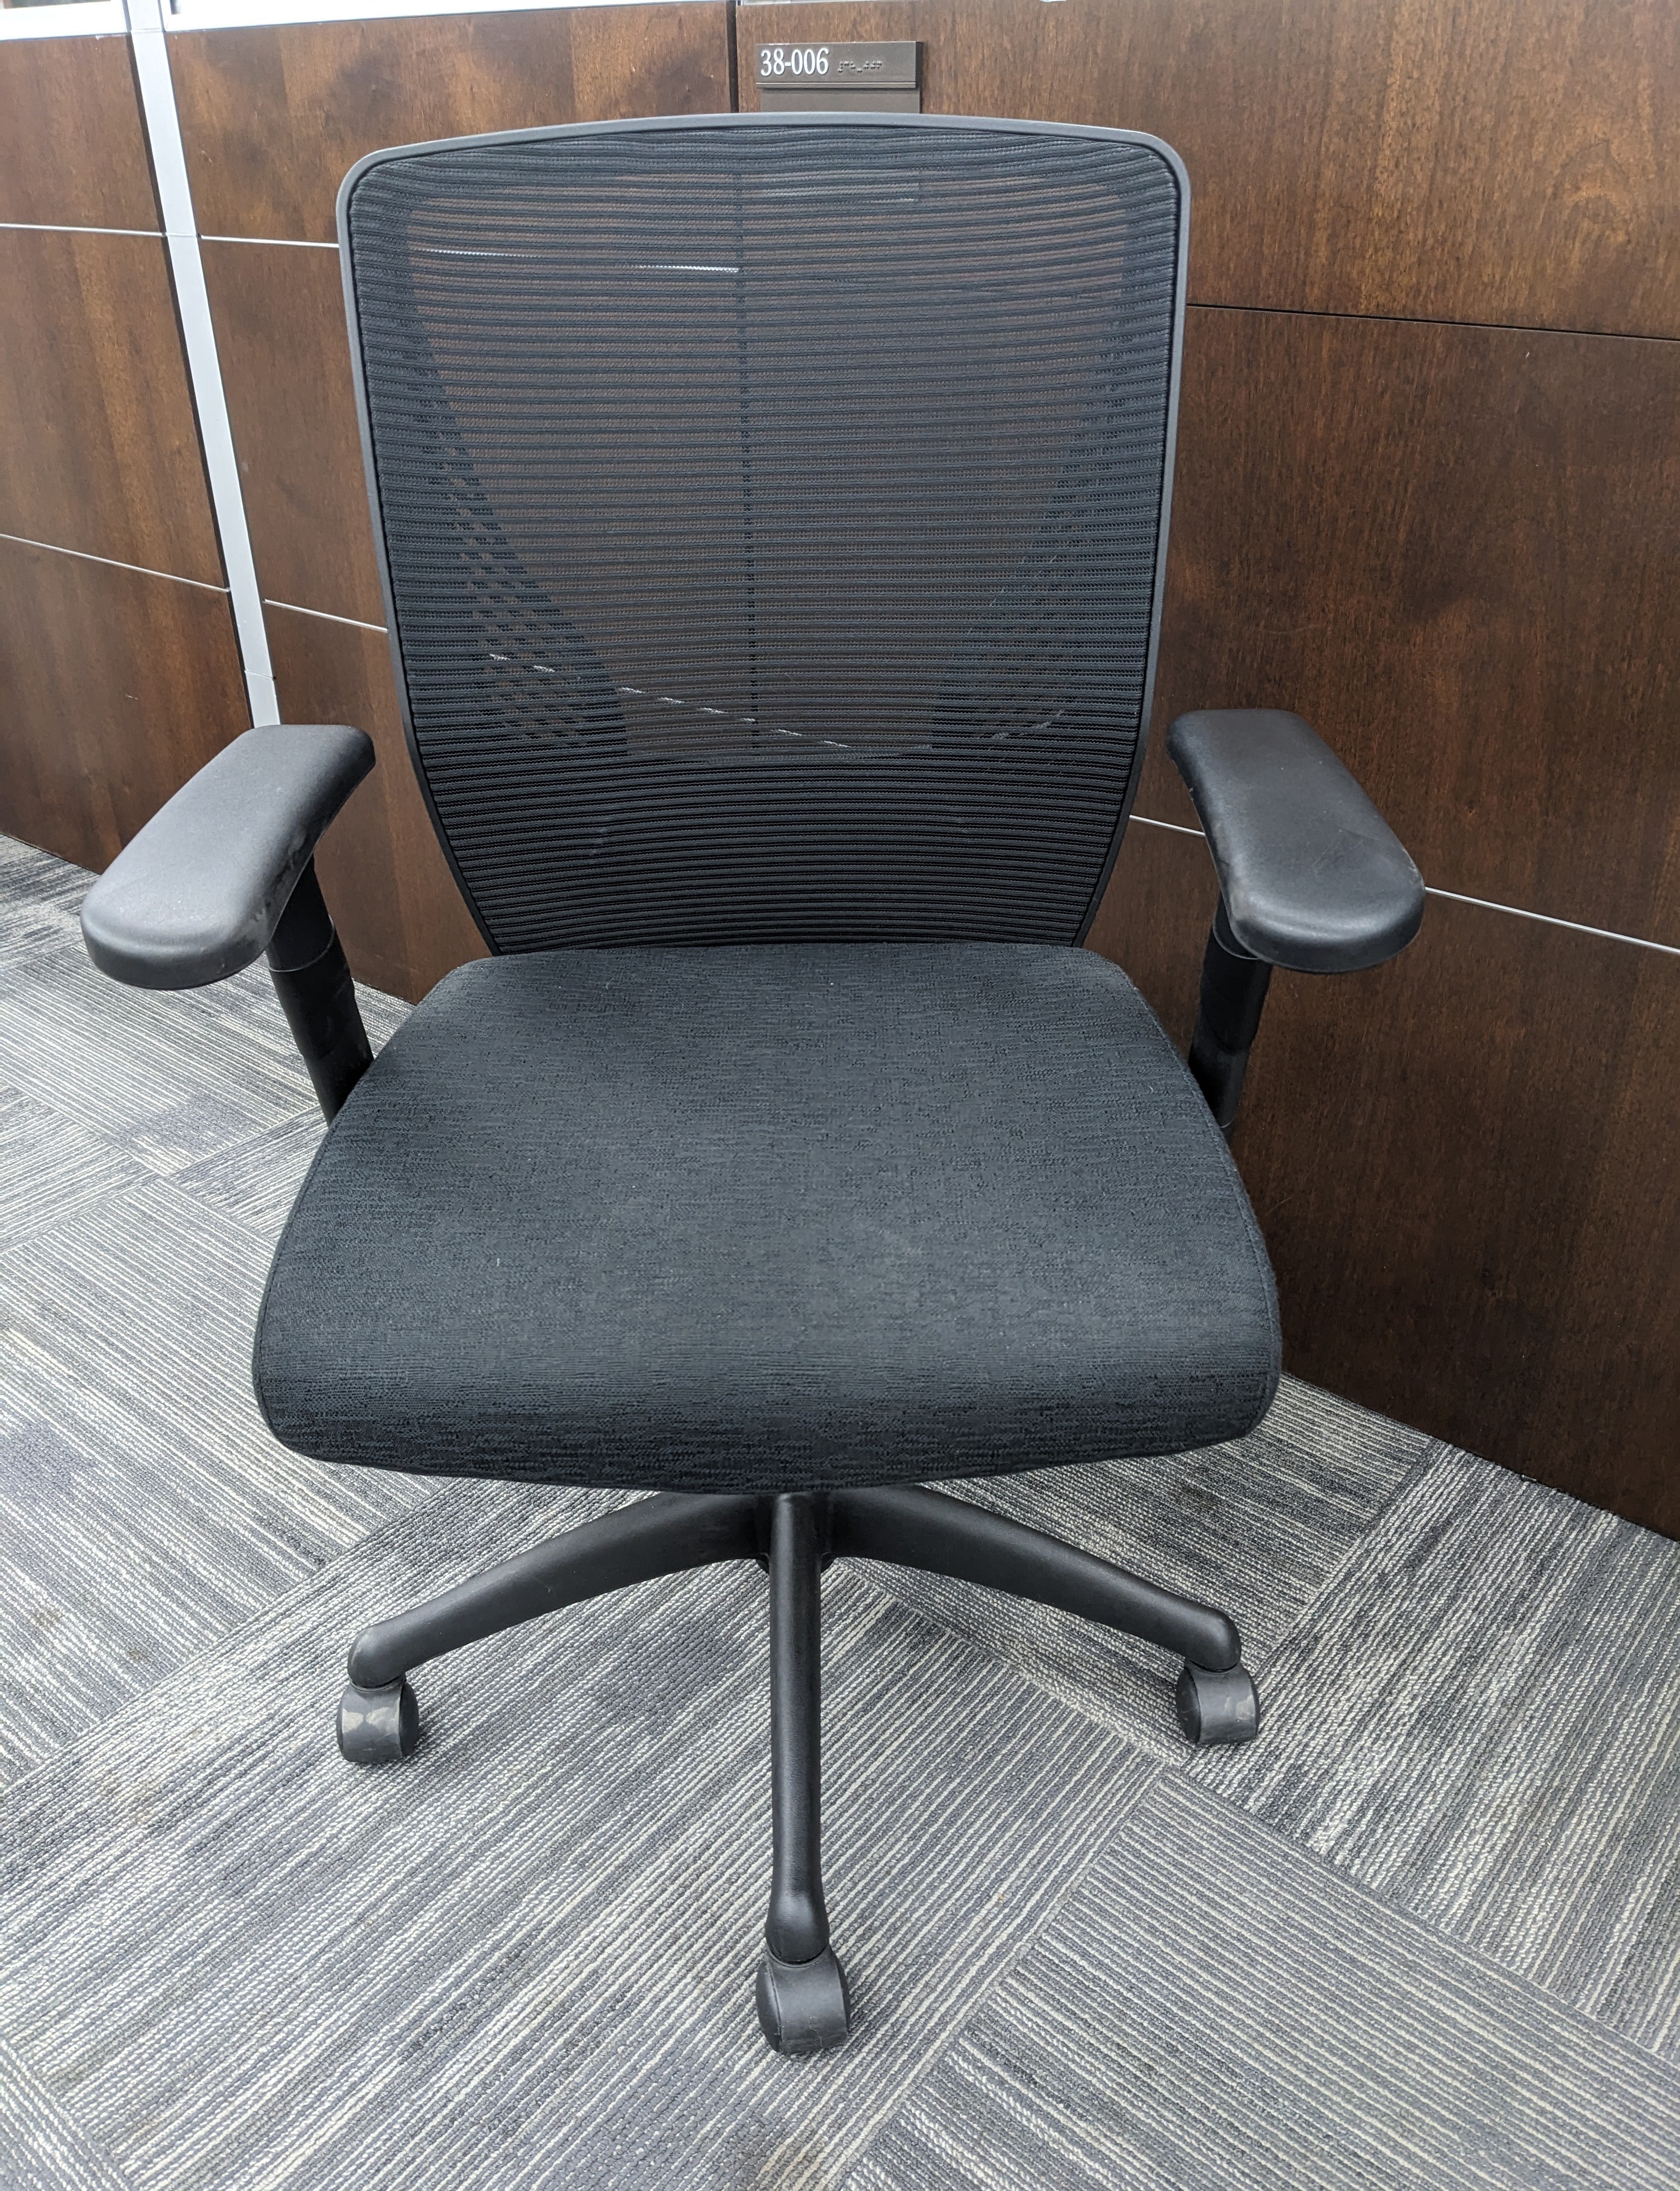 Used Black Task Chair by Conklin Office Furniture